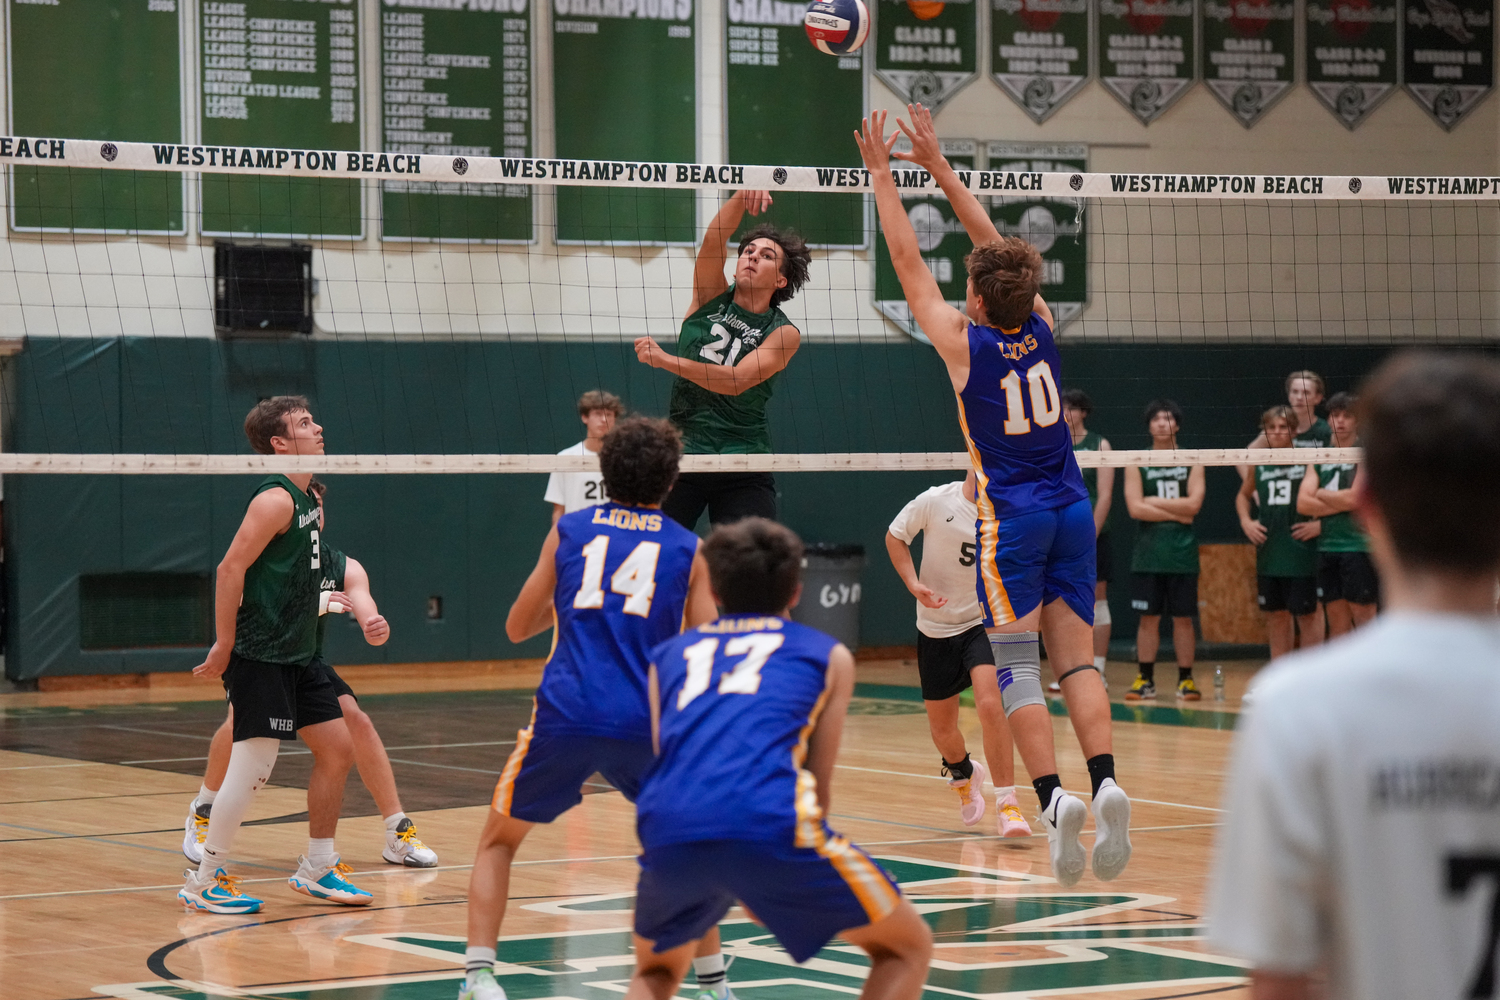 Junior middle hitter James Monserrate sends the ball past a blocker. RON ESPOSITO